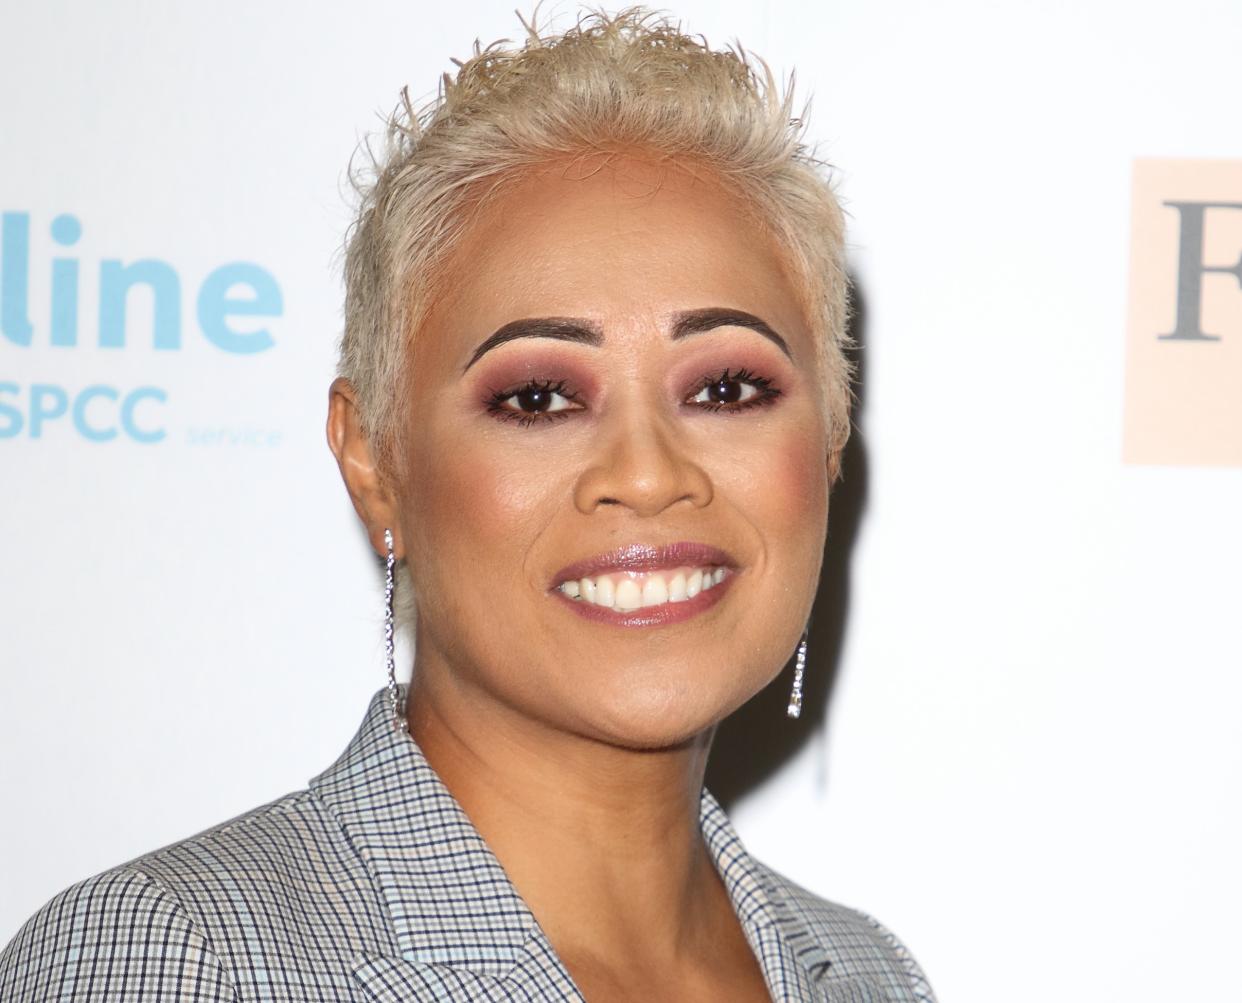 LONDON, UNITED KINGDOM - 2019/09/26: Monica Galetti attends The Childline Ball 2019 partnered with MasterChef for this year's theme at Old Billingsgate in London. (Photo by Keith Mayhew/SOPA Images/LightRocket via Getty Images)